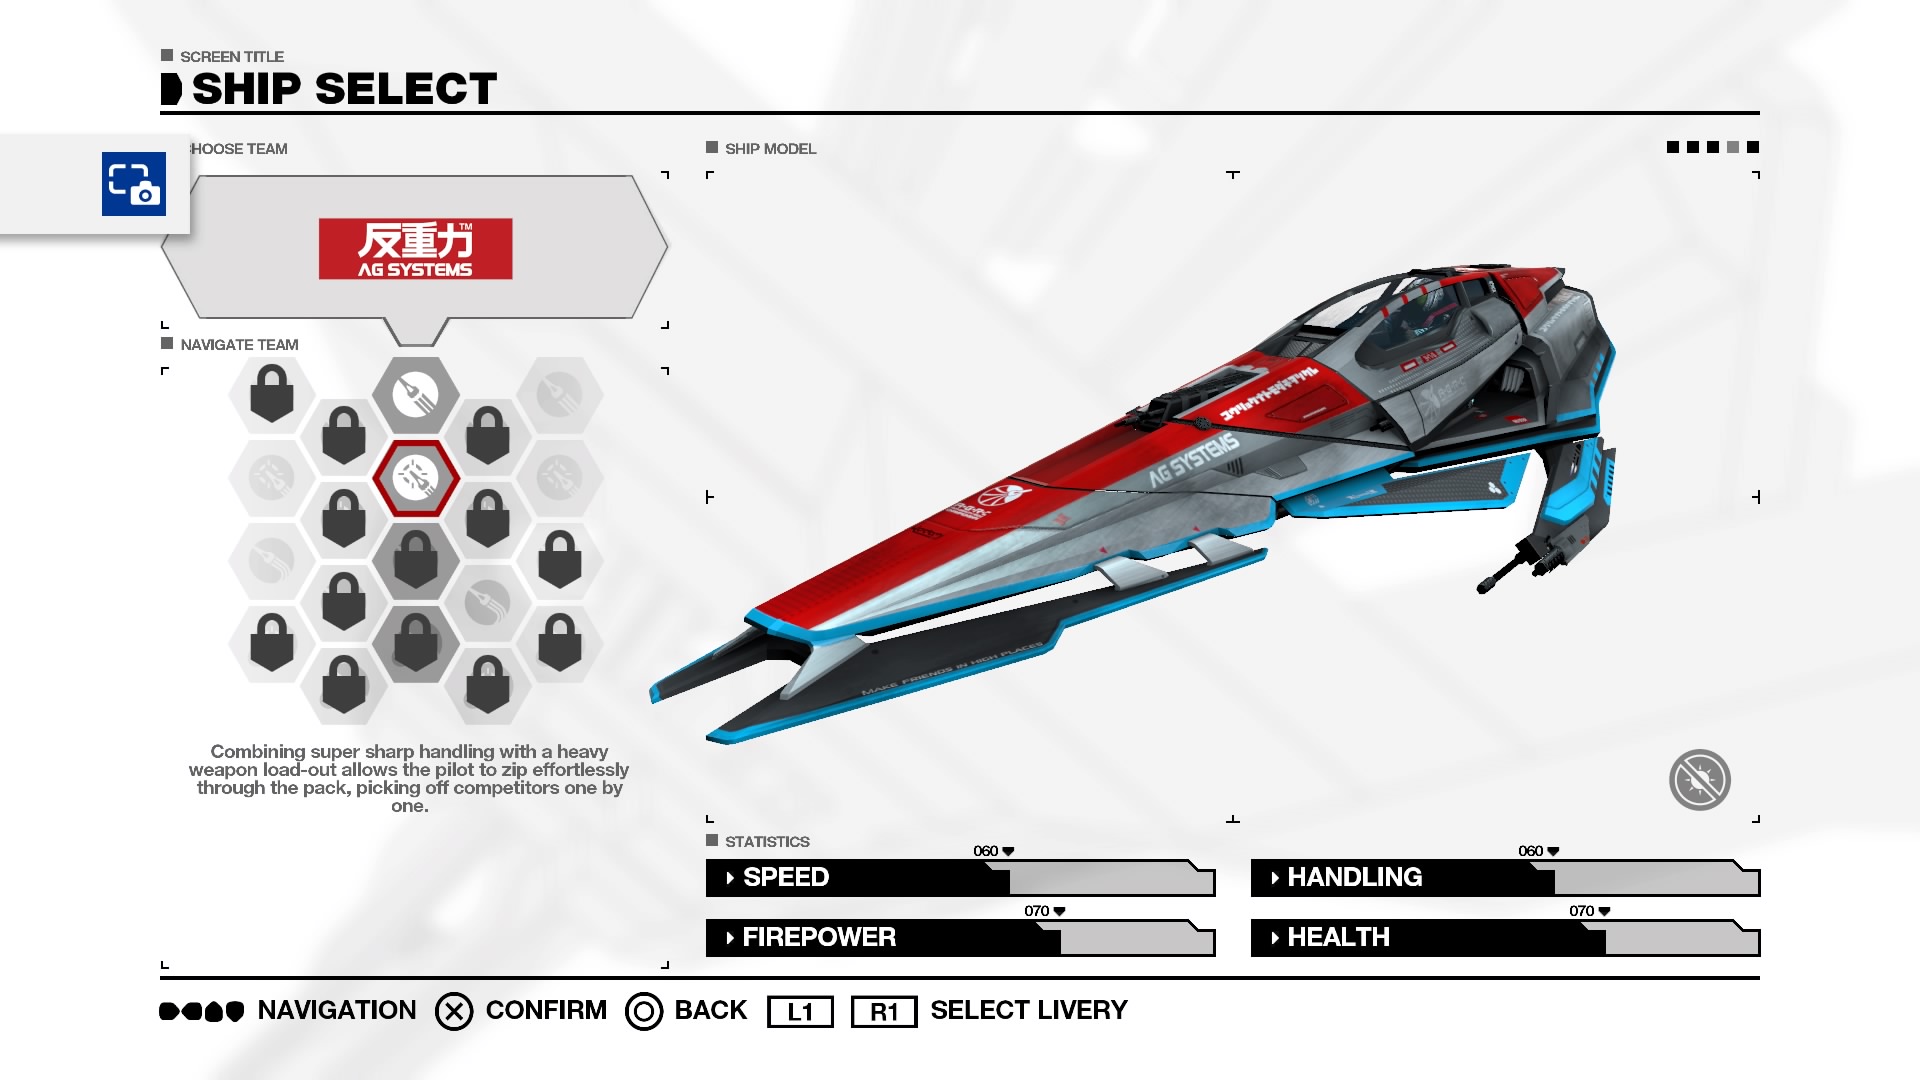 wipeout collection ps4